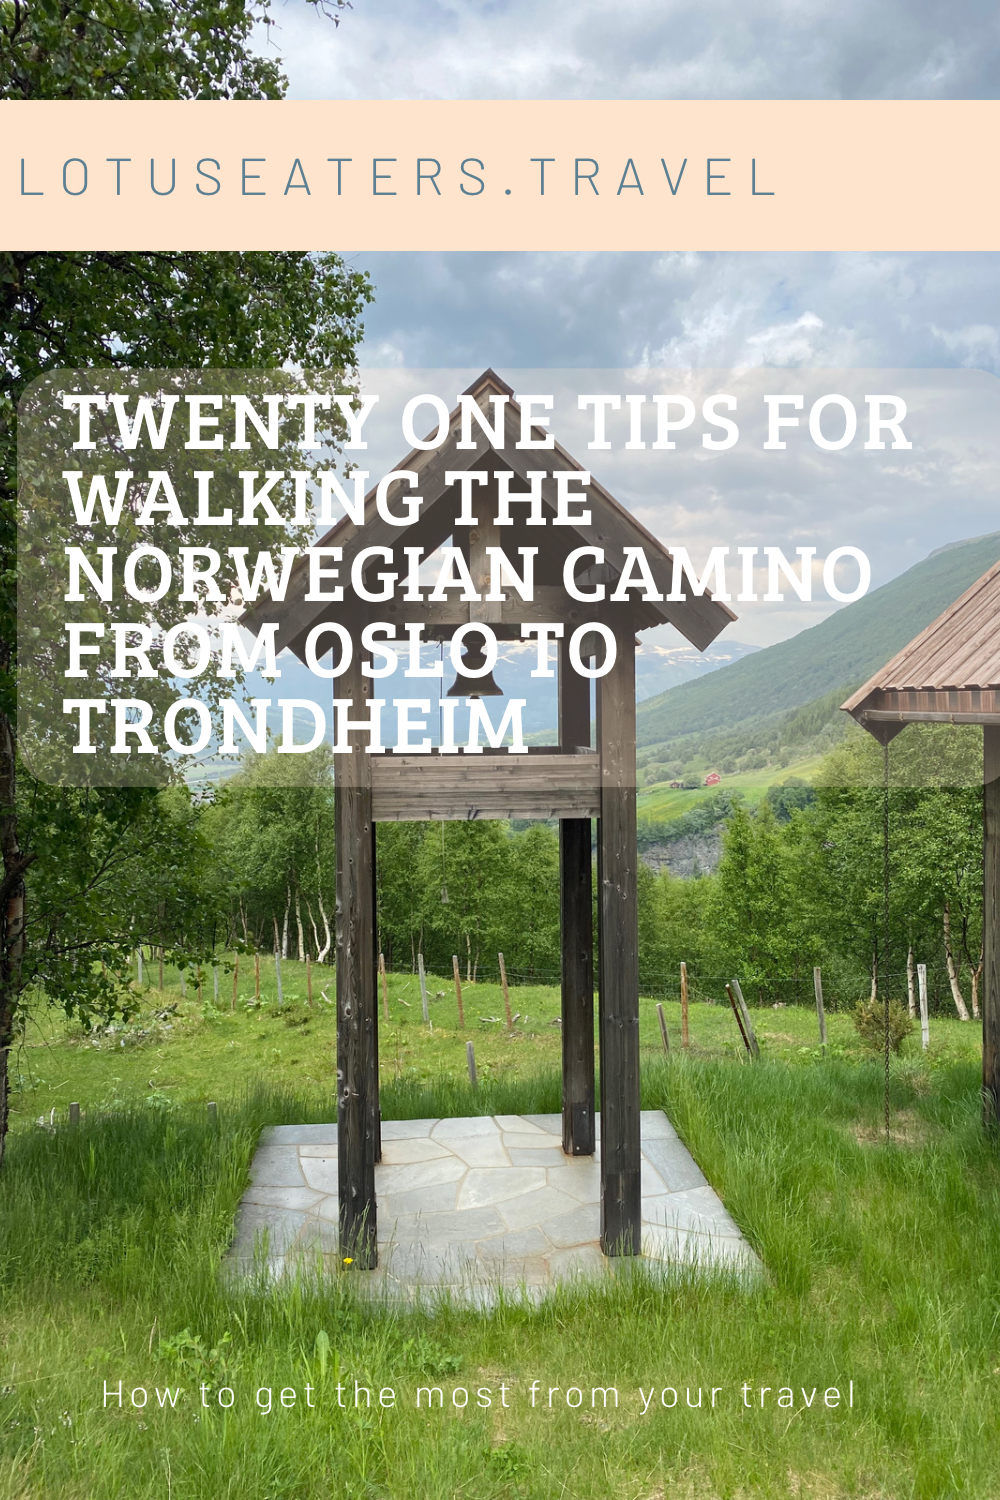 Twenty One Tips for walking the Norwegian Camino from Oslo to Trondheim